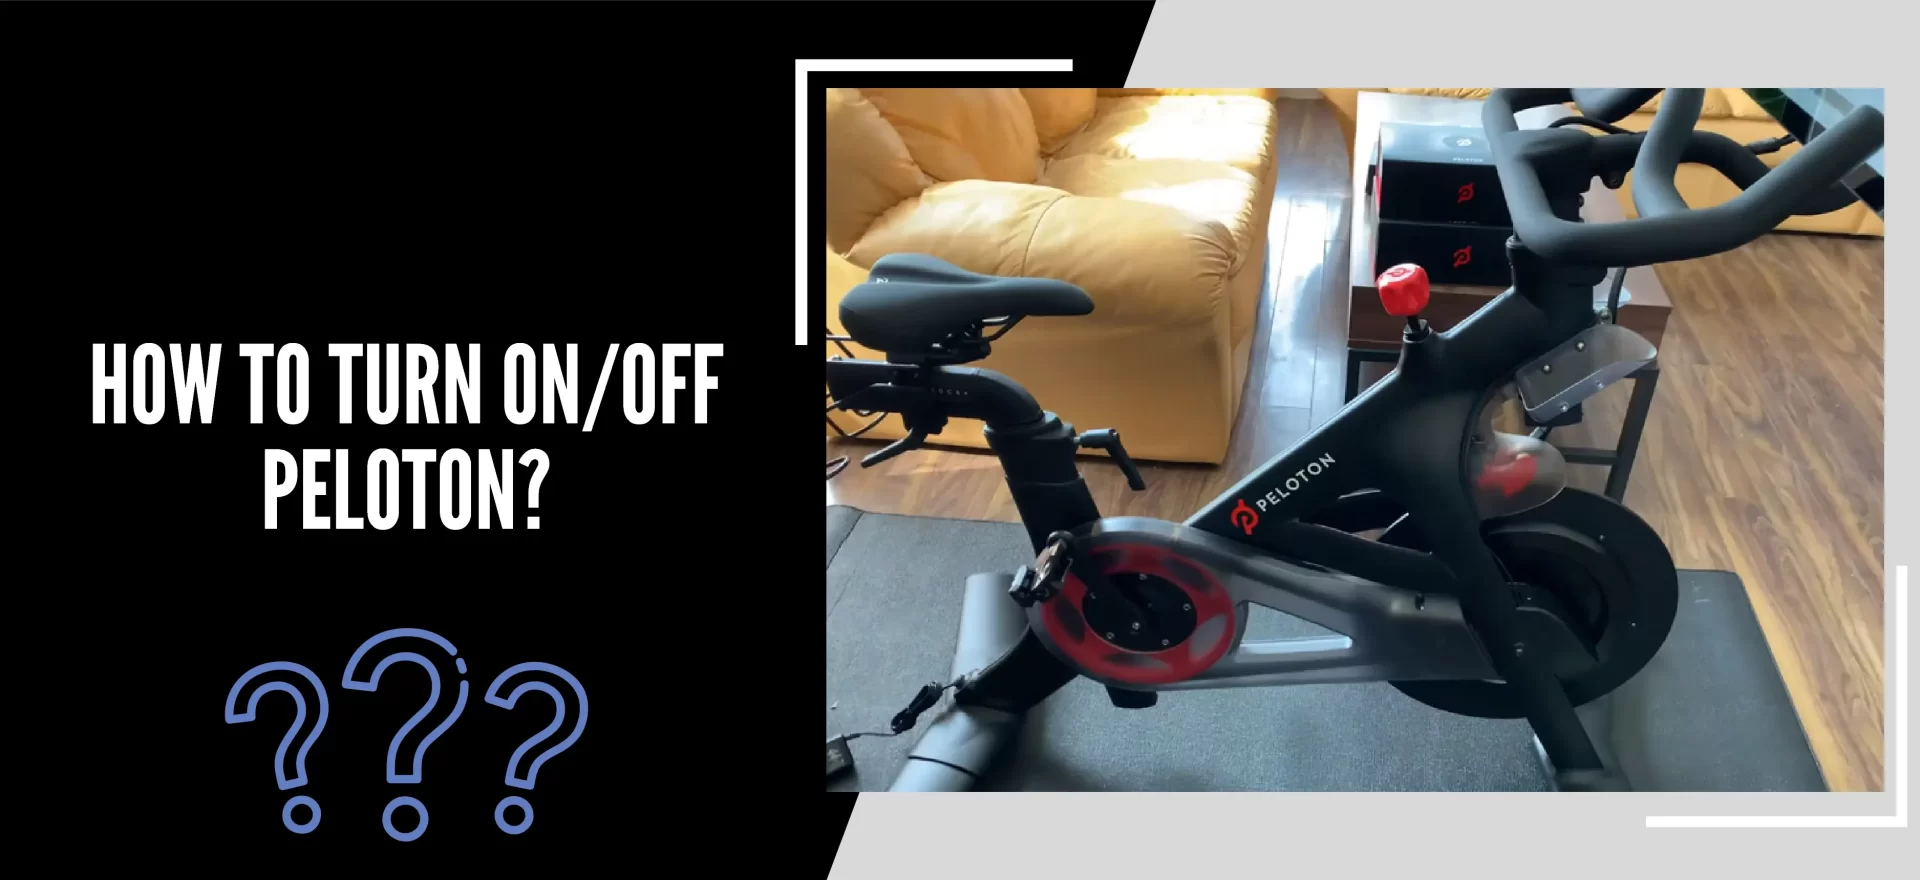 How To Turn On/Off Peloton?